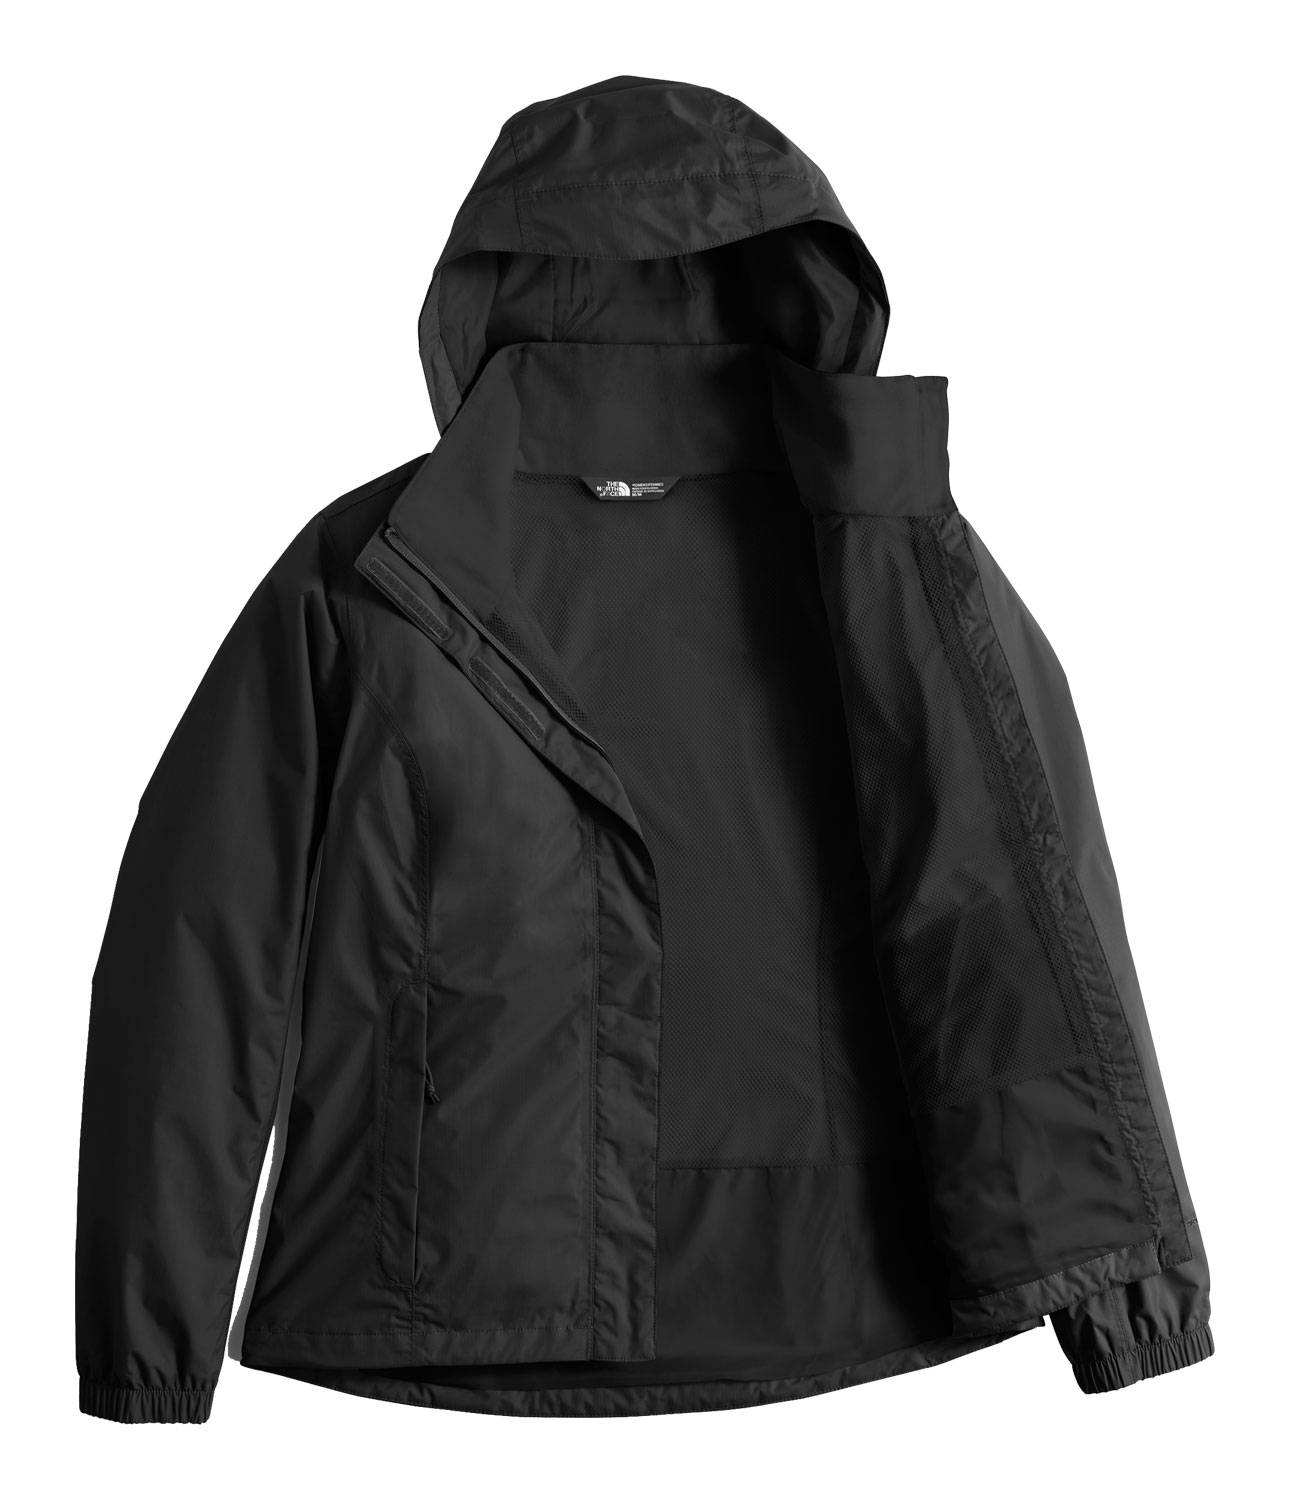 North Face Womens Hoodie Size Chart